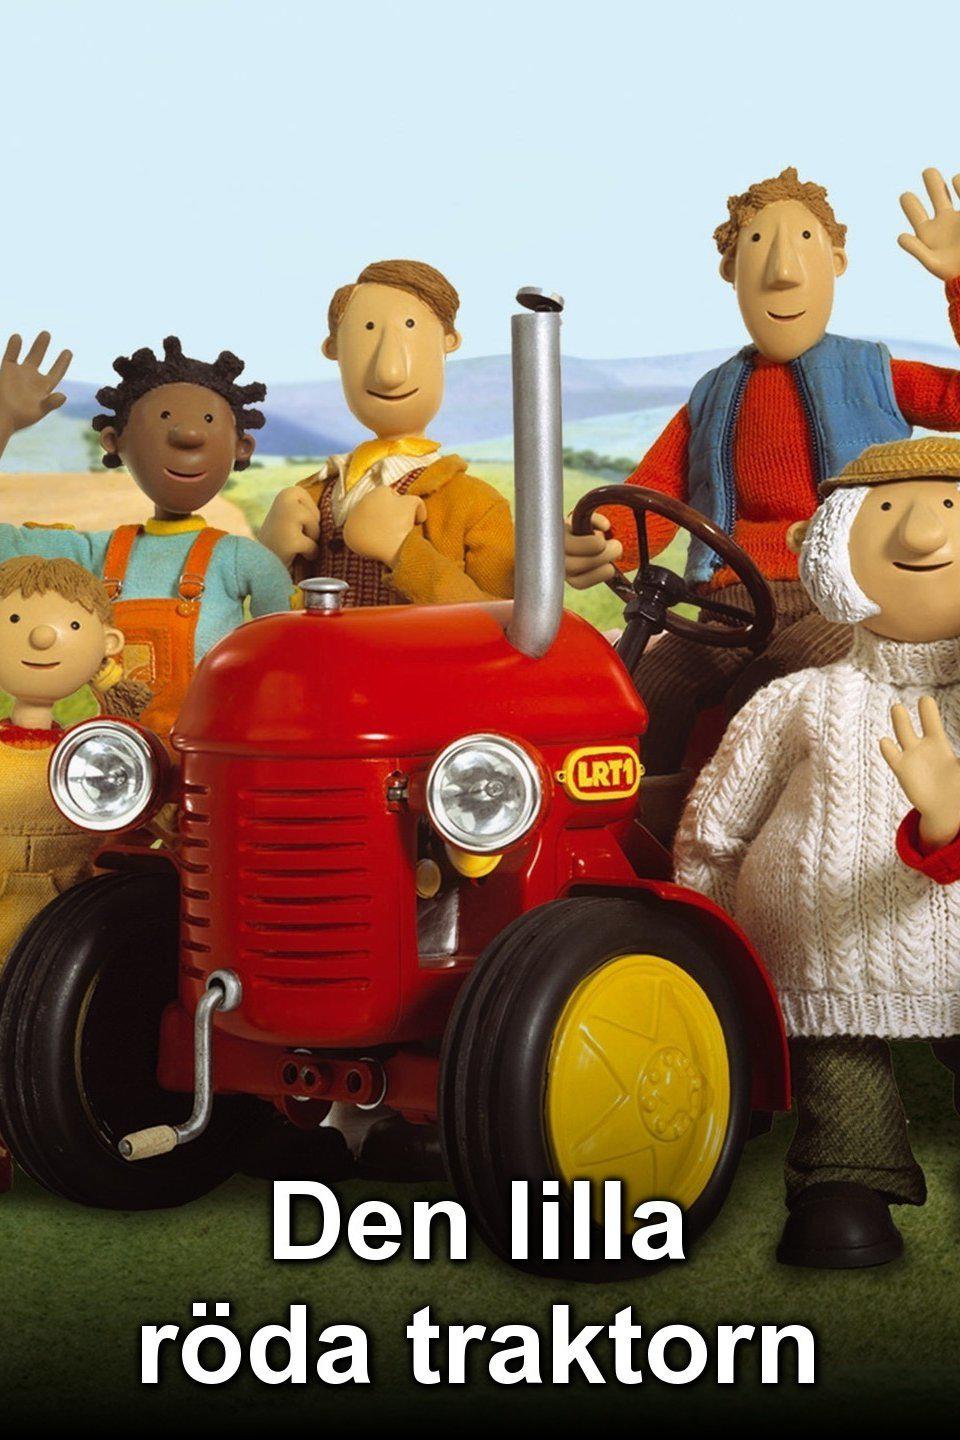 TV ratings for Little Red Tractor in the United Kingdom. BBC TV series